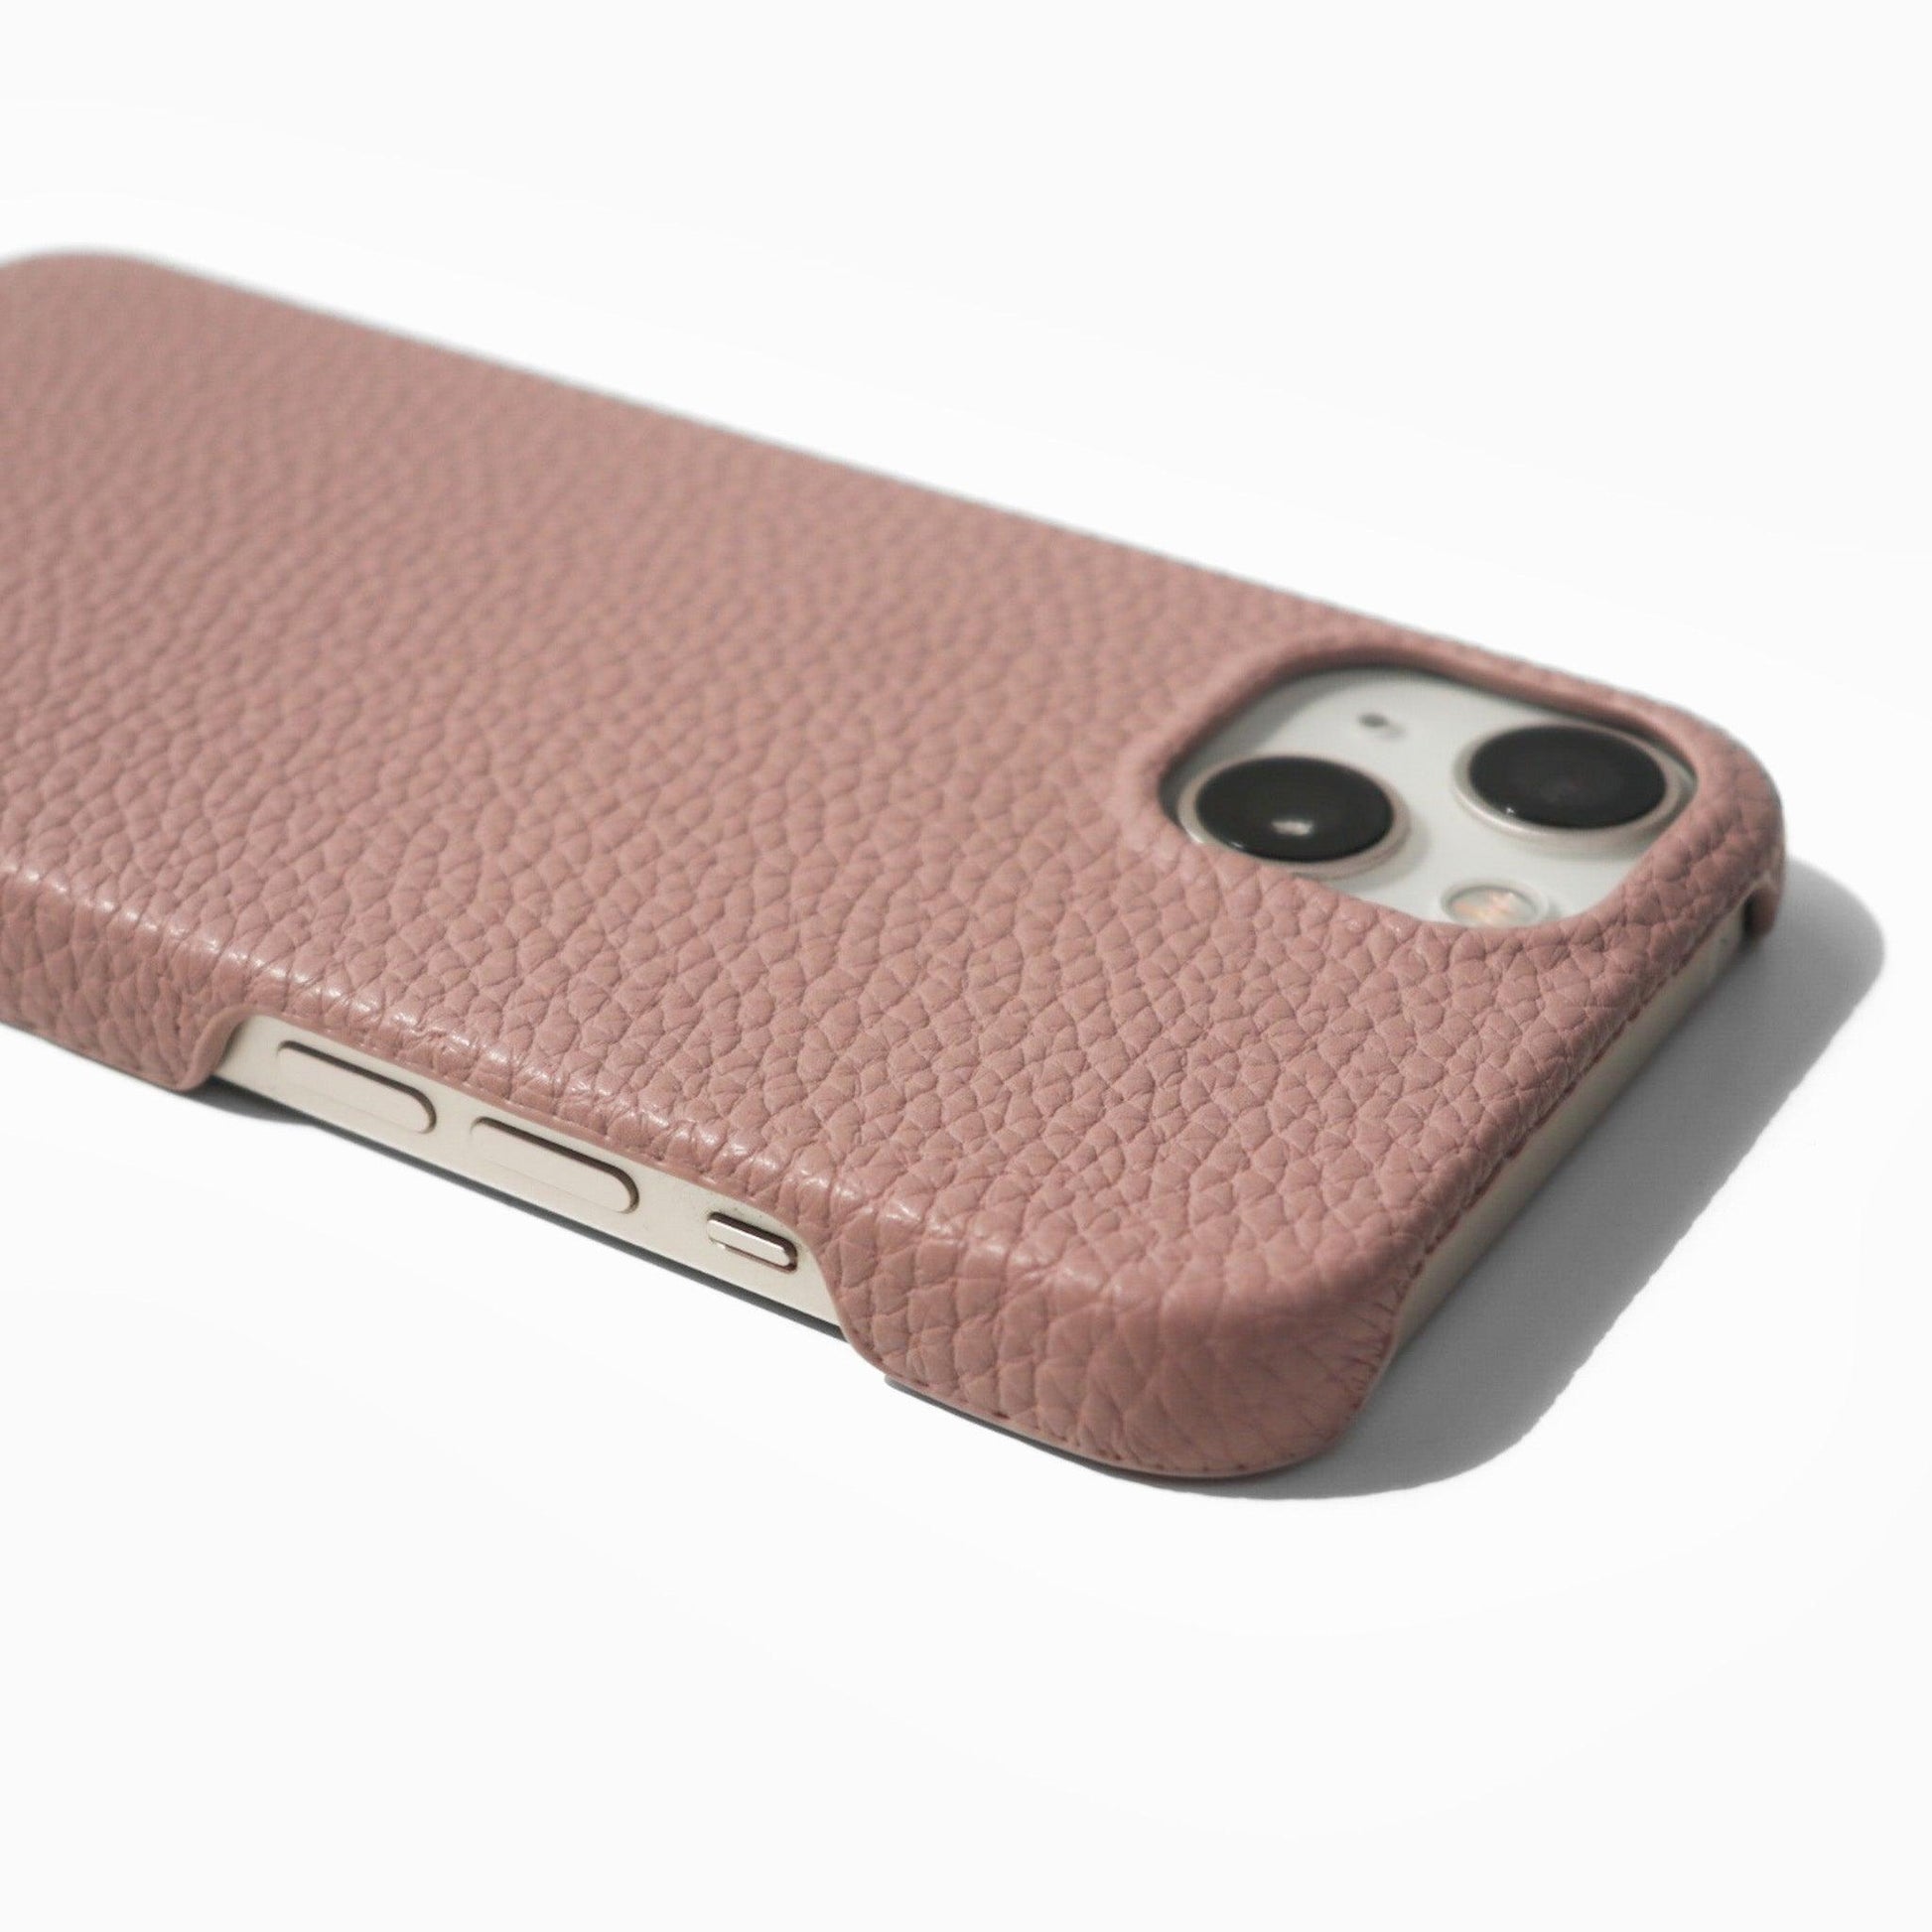 iPhone Thin Case - Dusty Pink